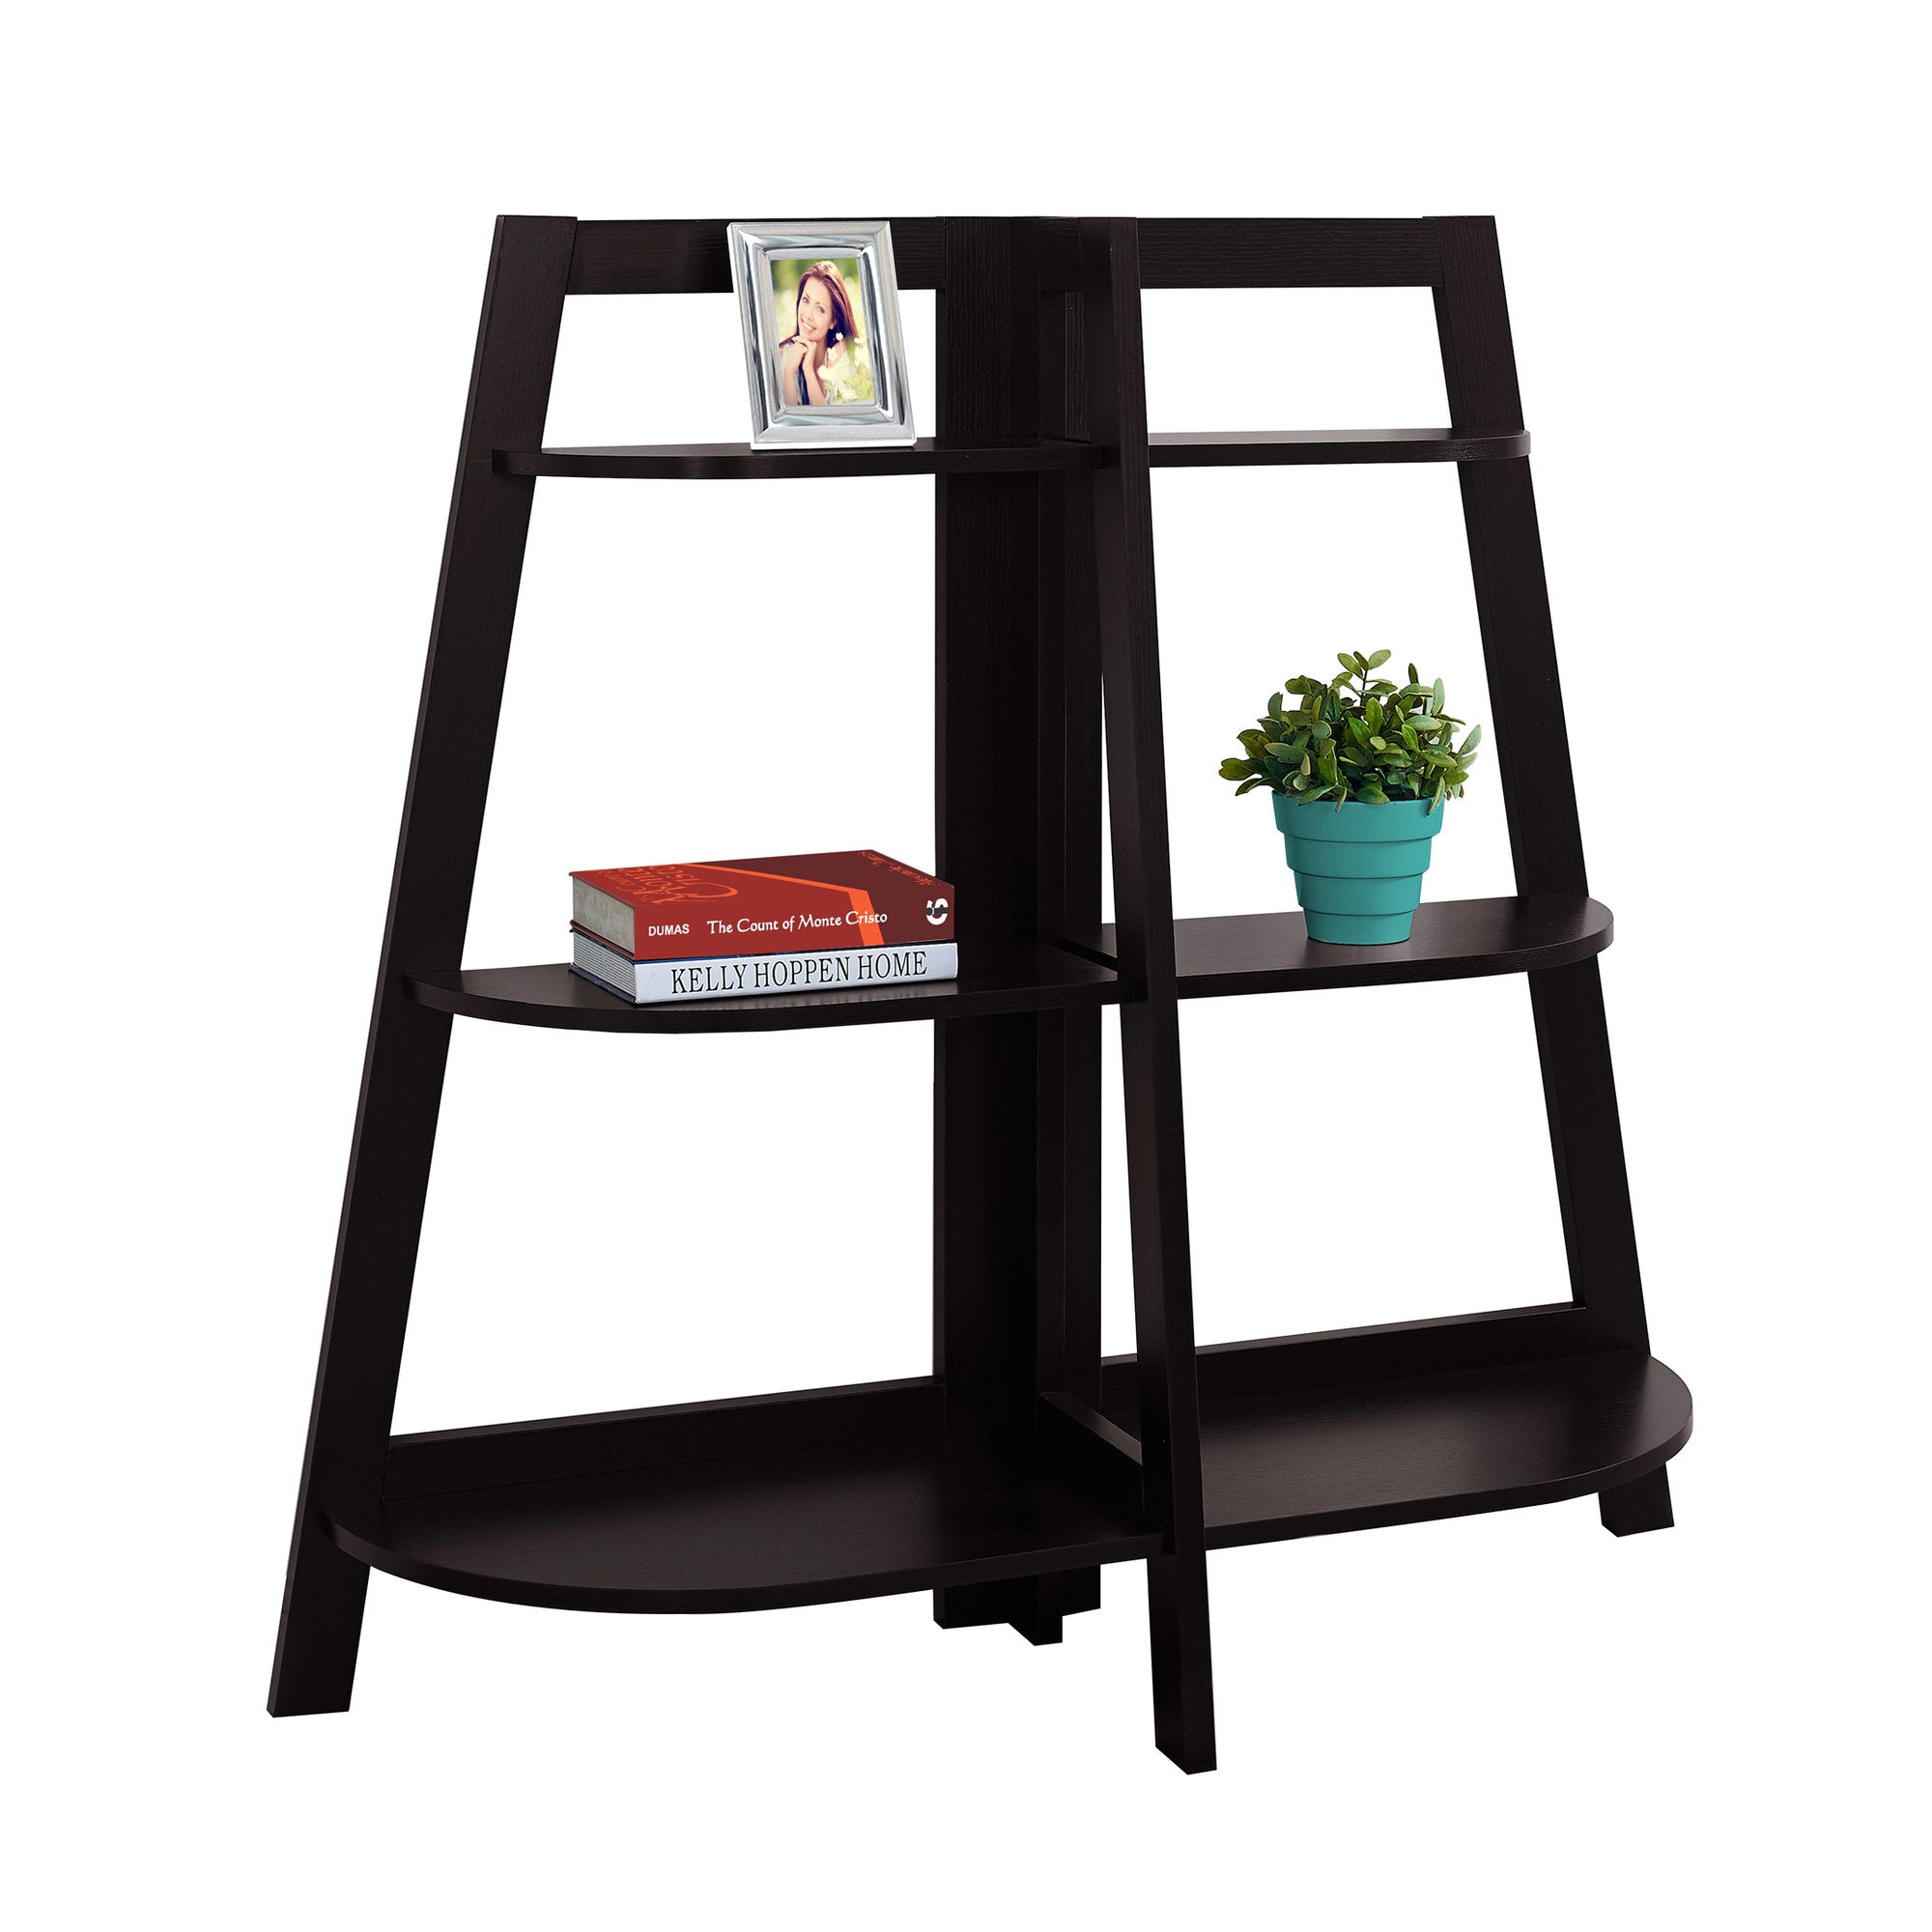 MN-522426    Bookshelf, Bookcase, Etagere, 3 Tier, 48"H, Office, Bedroom, Brown Laminate, Contemporary, Modern